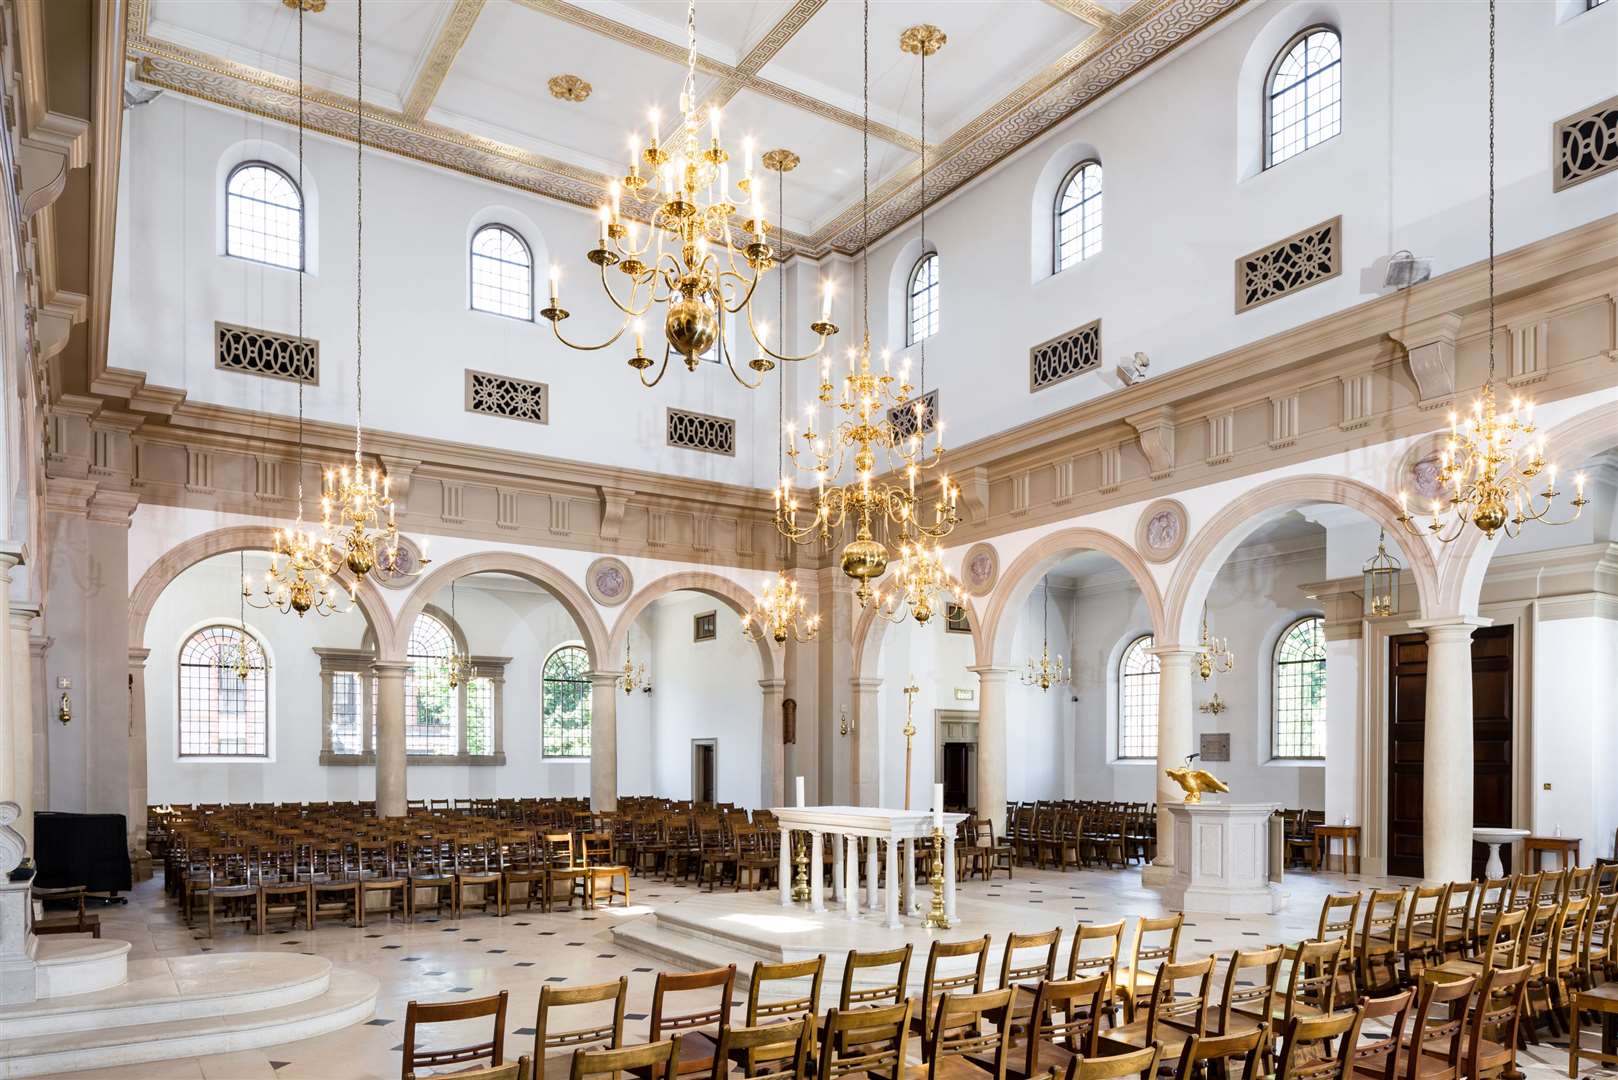 The rebuilt Brentwood Cathedral was opened in 1991 (Historic England Archive/ PA)